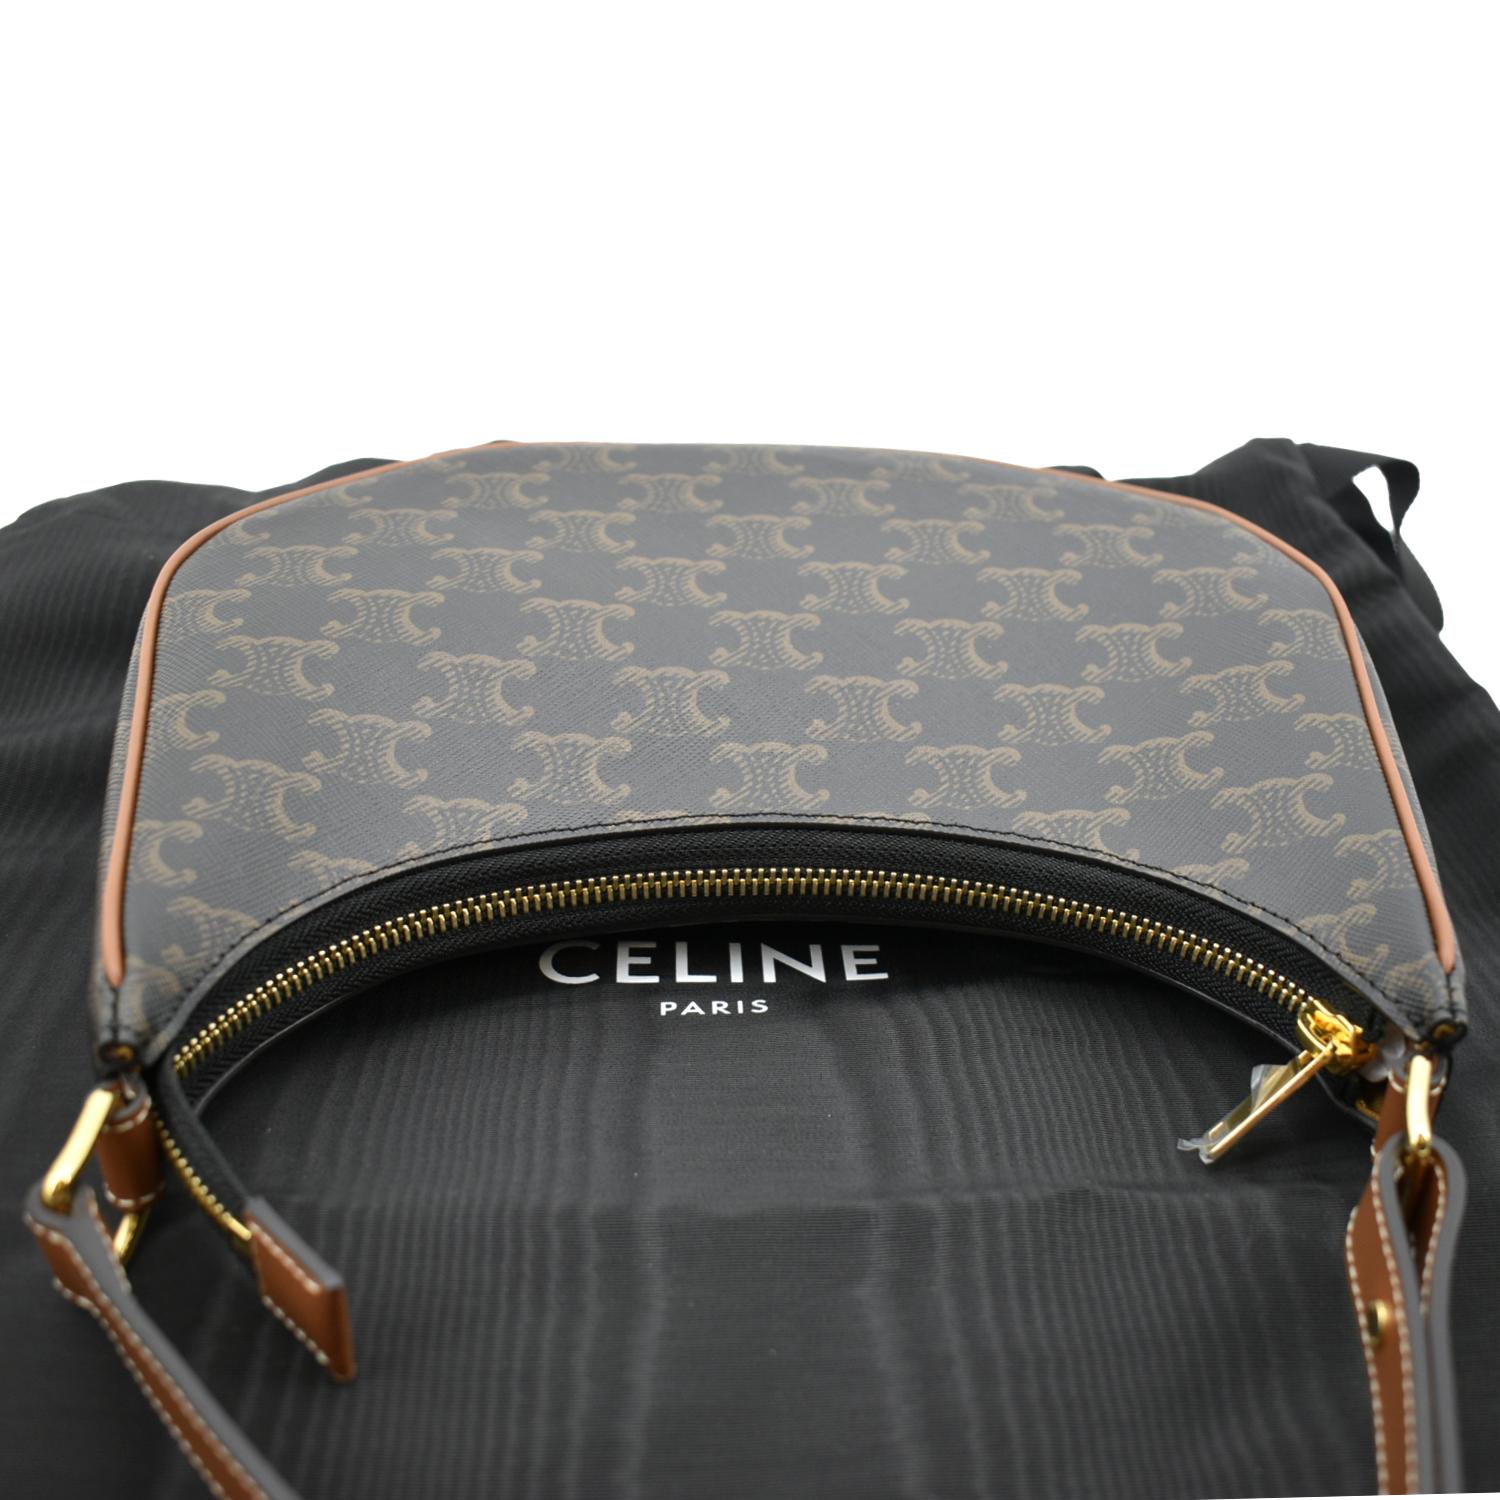 NEW! CELINE PHONE POUCH IN TRIOMPHE CANVAS AND CALFSKIN - TAN Bags